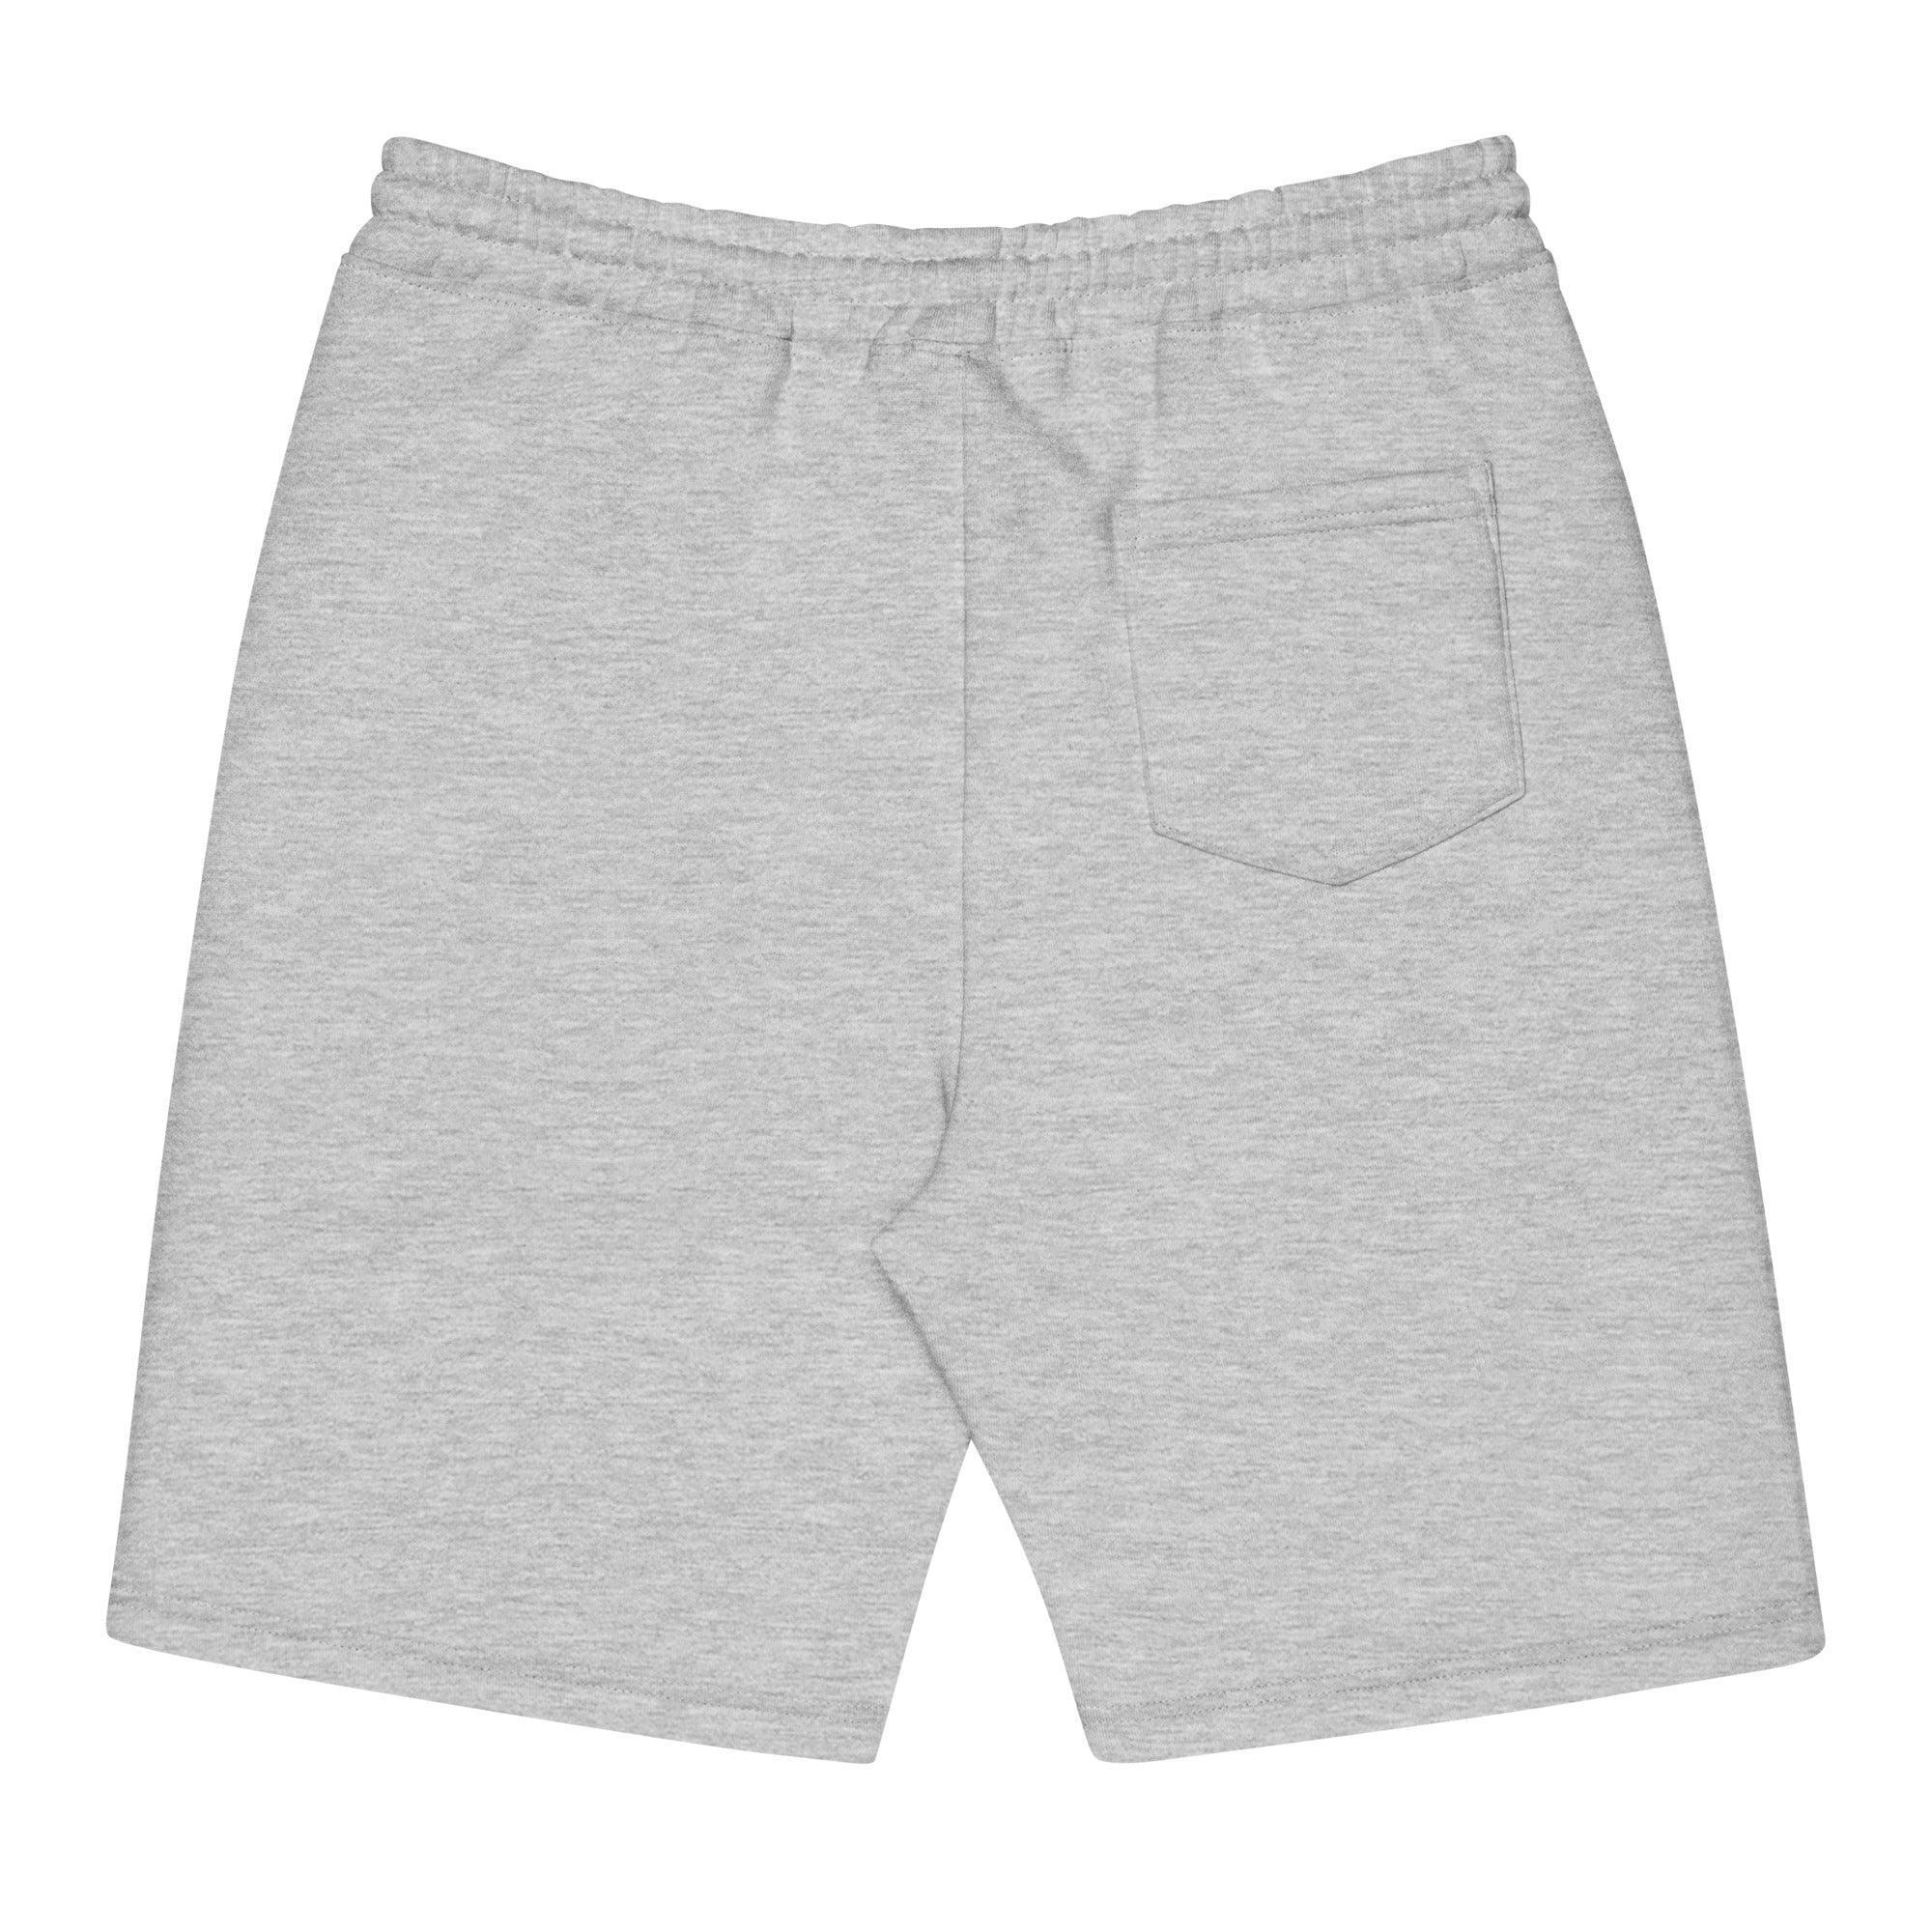 Panic At the Crypto Fleece Shorts - InvestmenTees